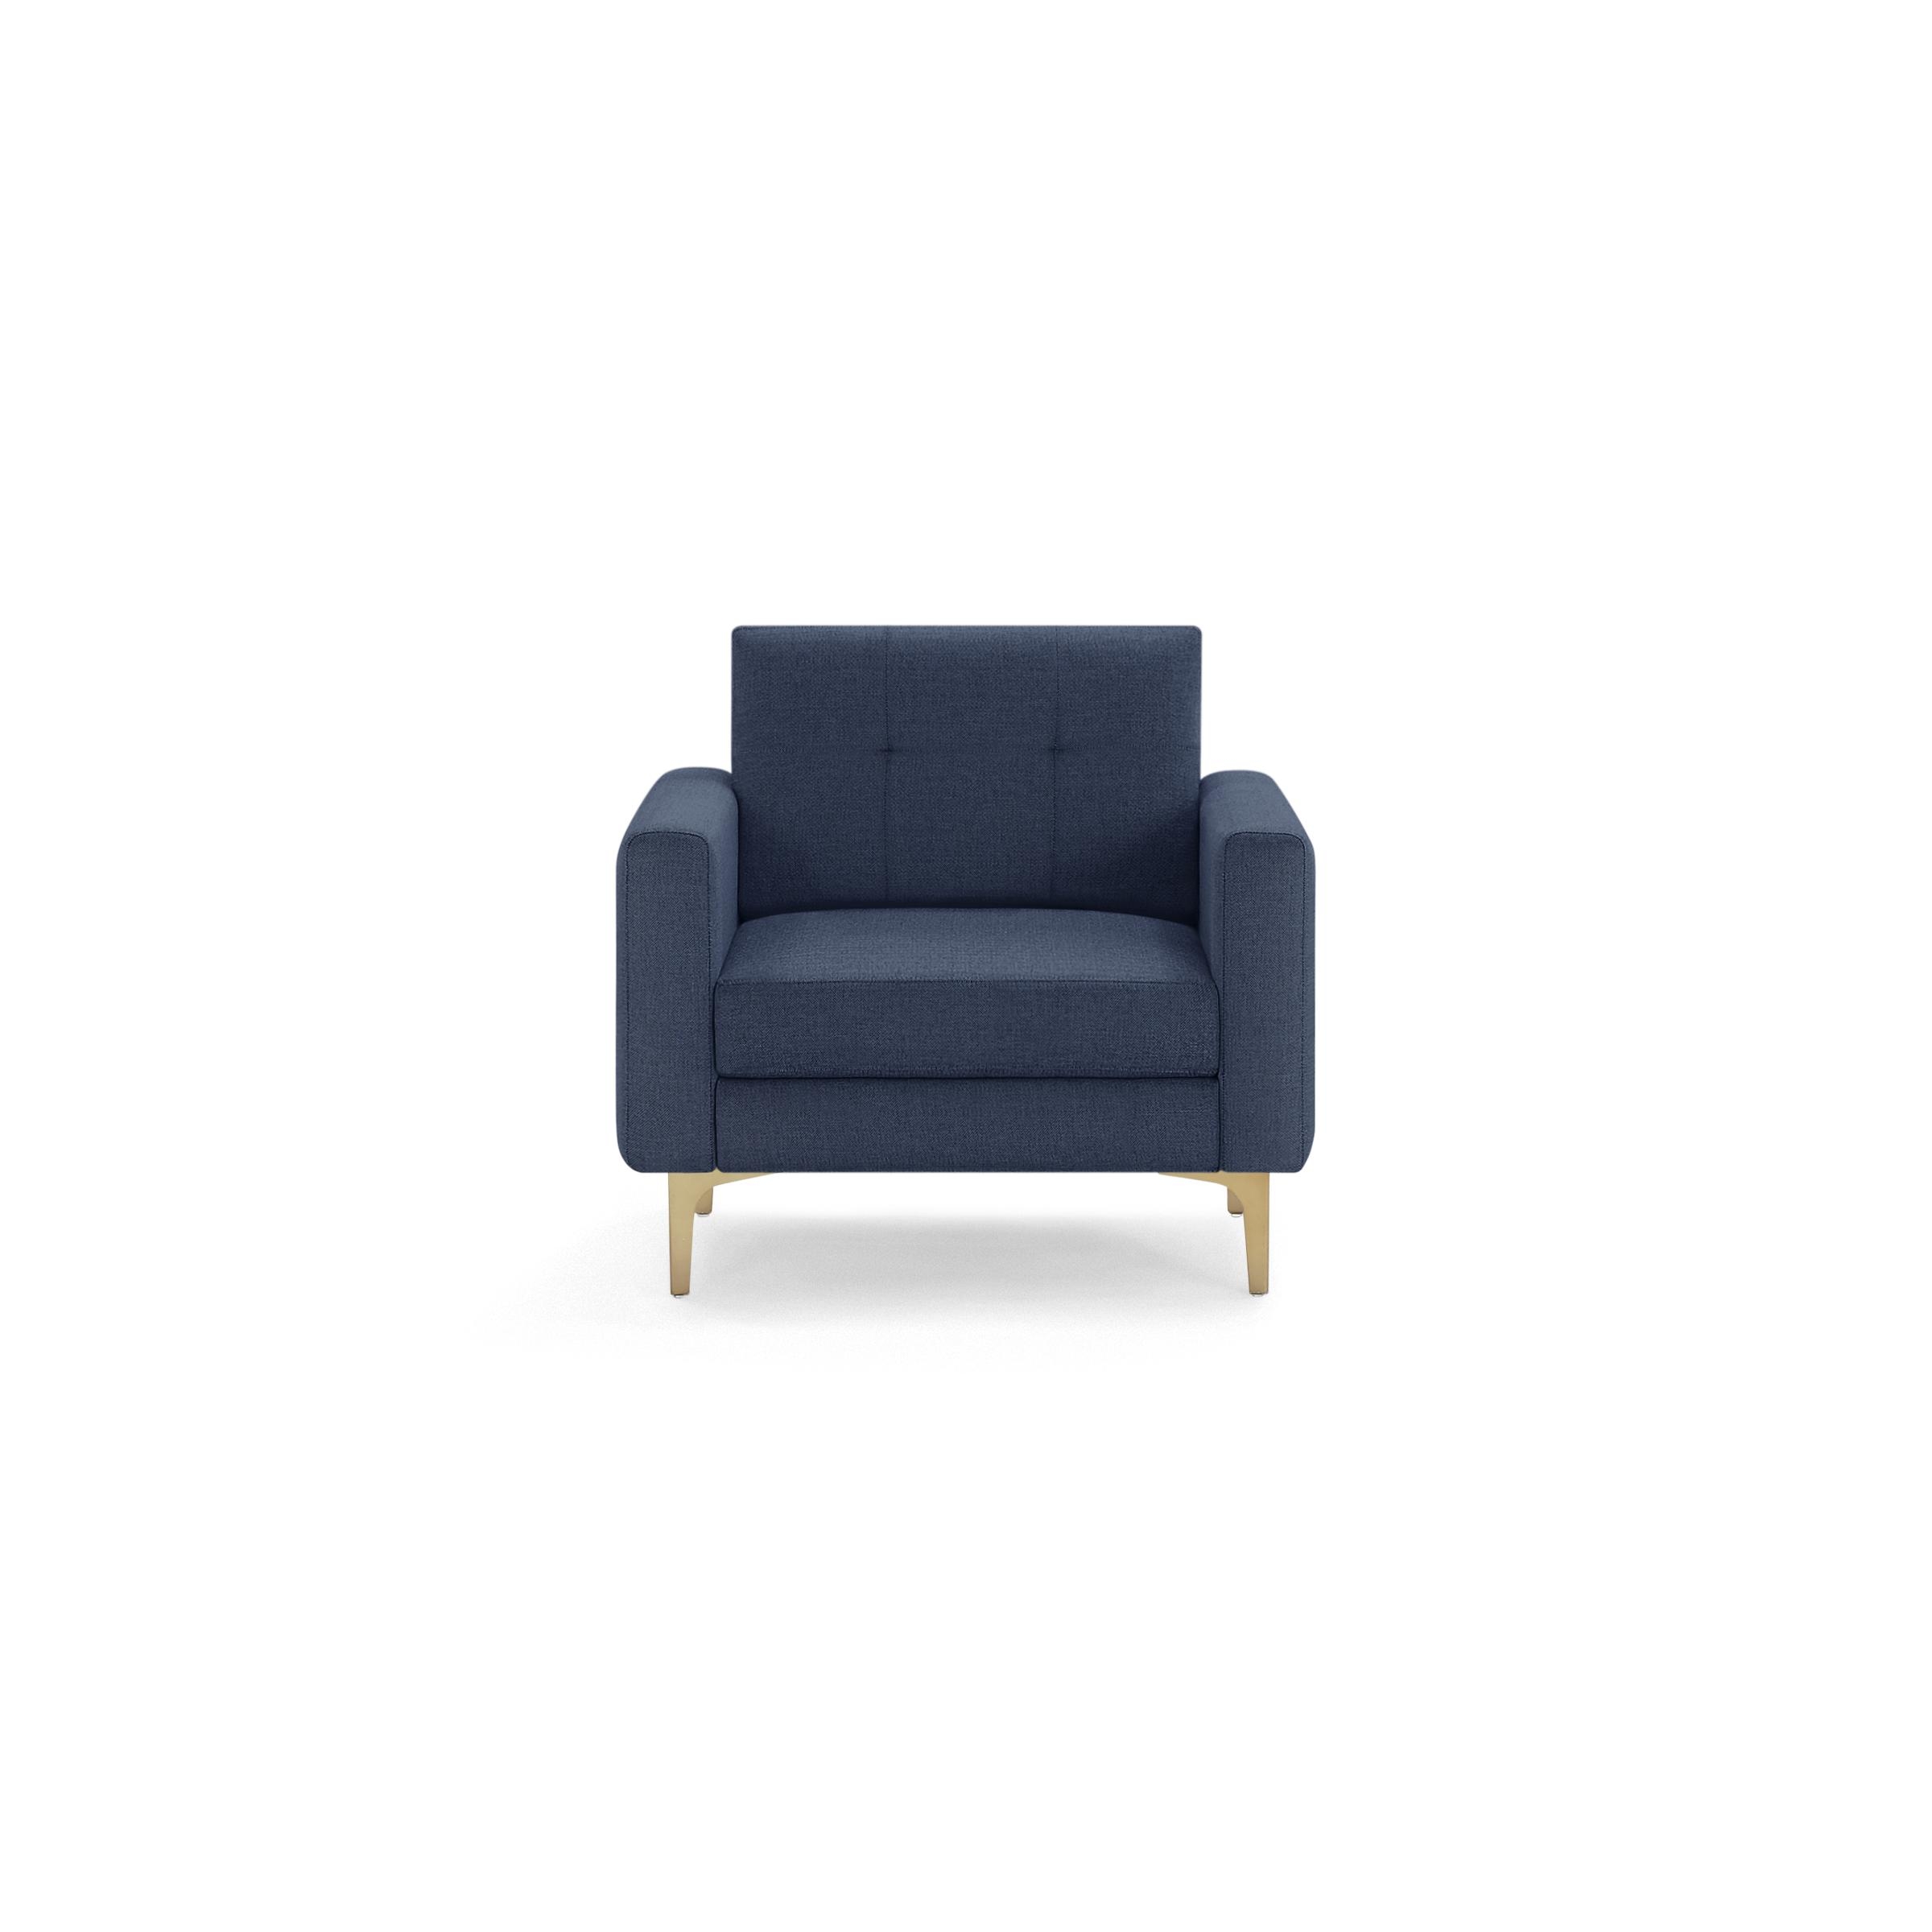 Nomad Armchair in Navy Blue, Brass Legs - Image 0